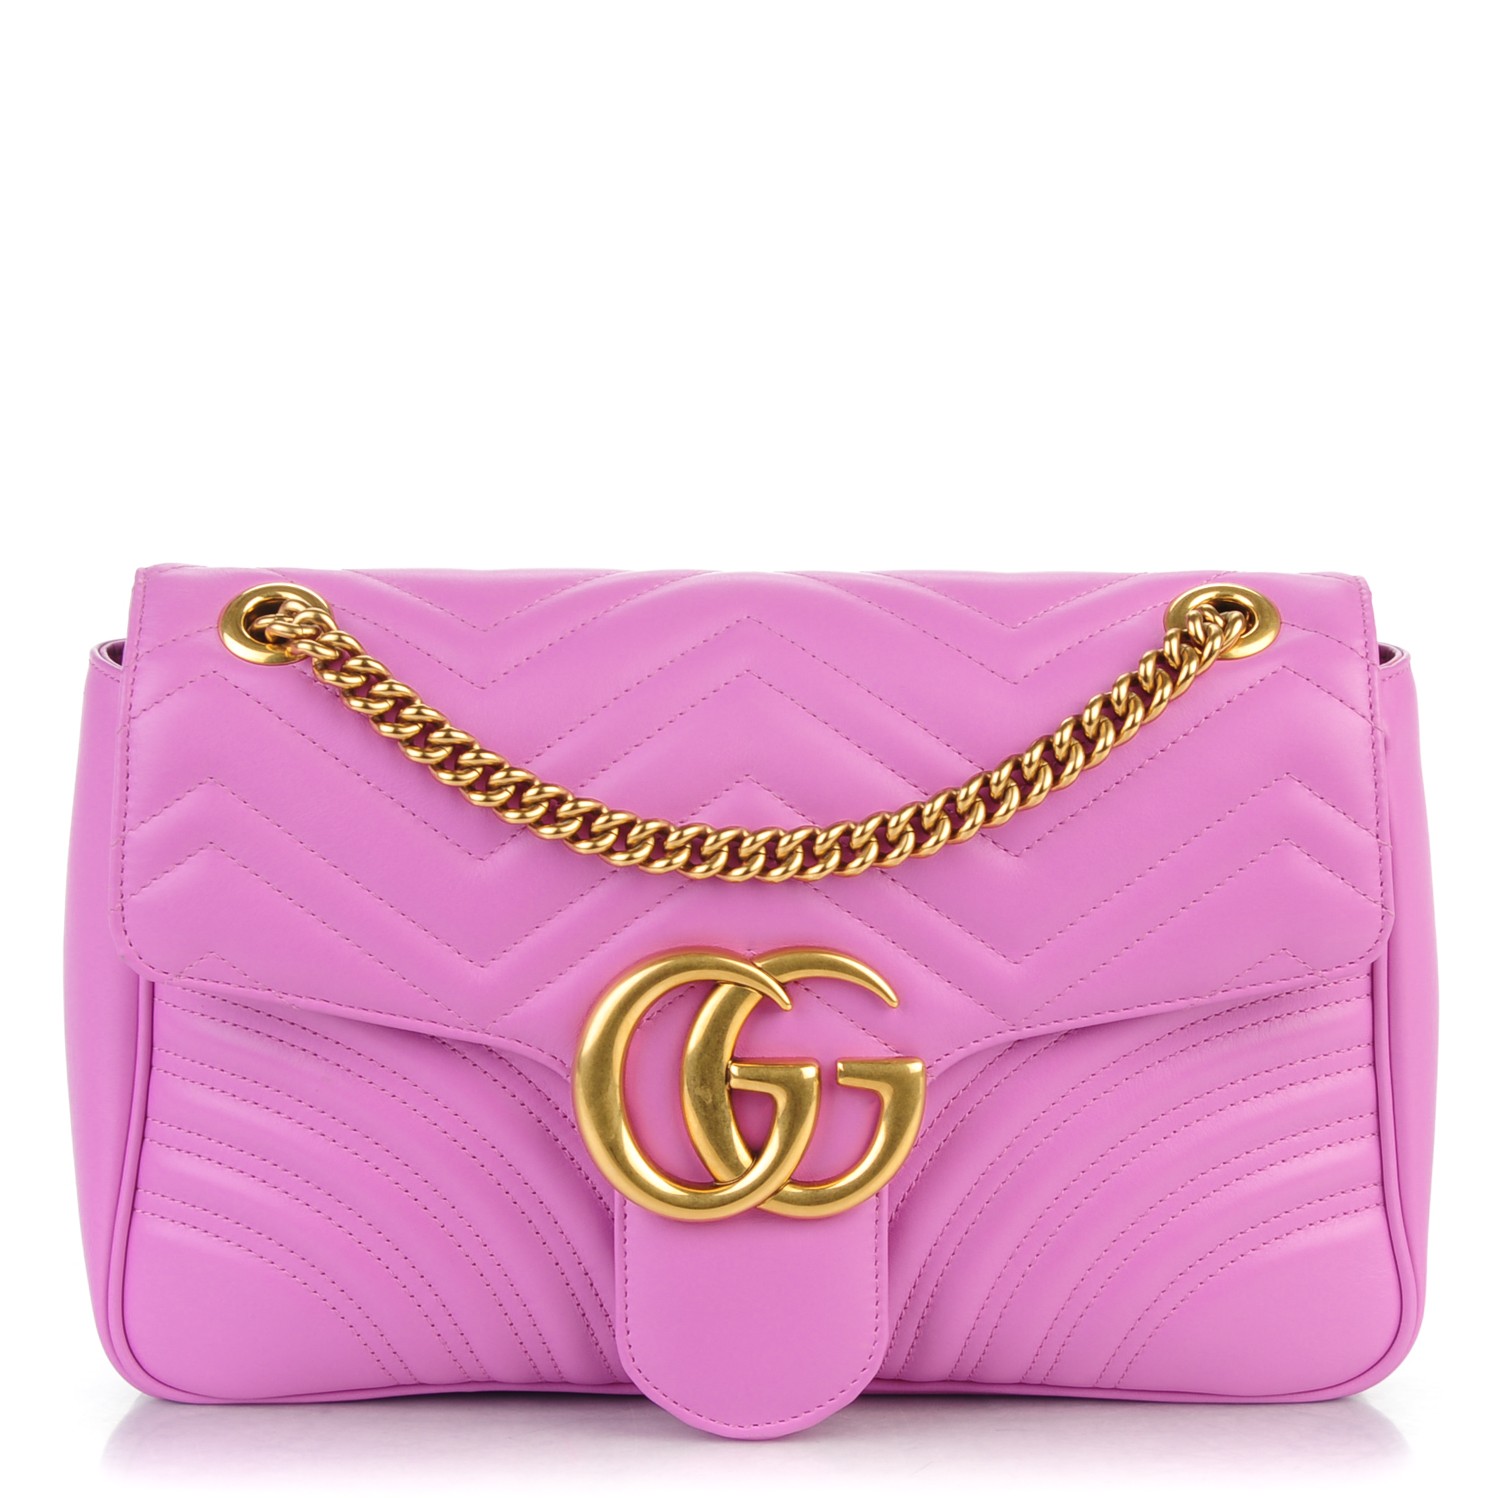 gucci marmont pink bag